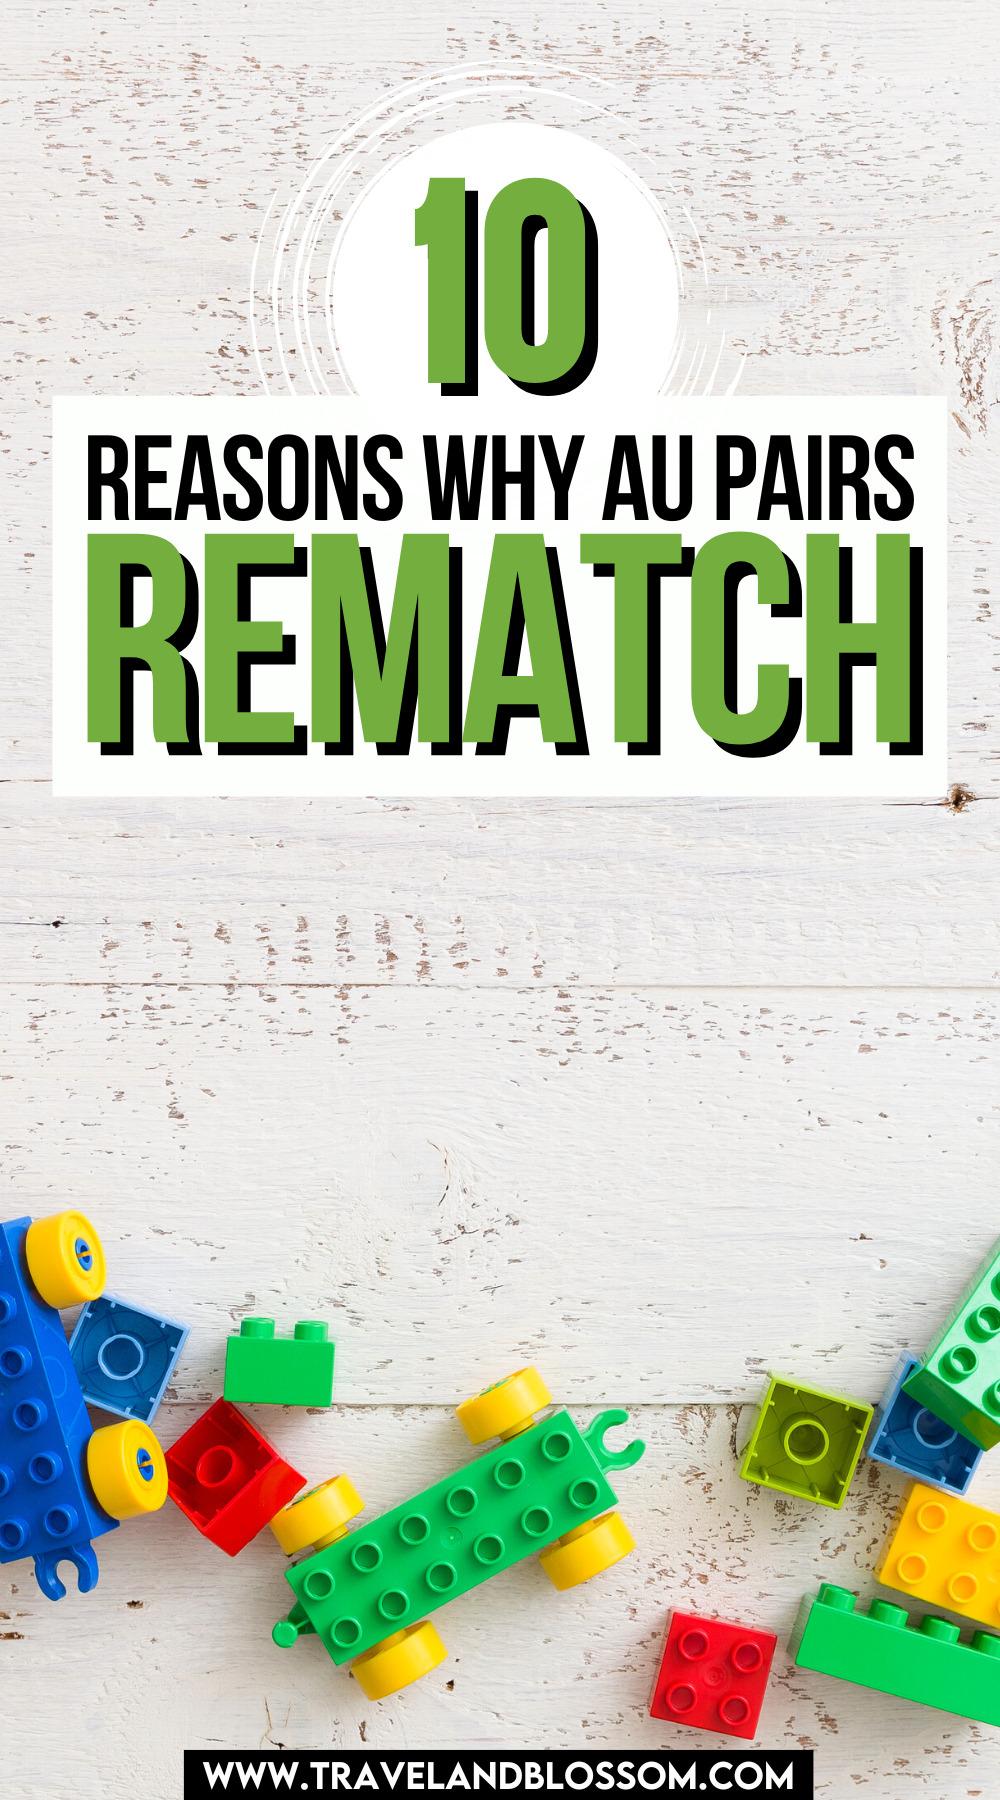 The Top 10 Reasons Why Au Pairs Rematch